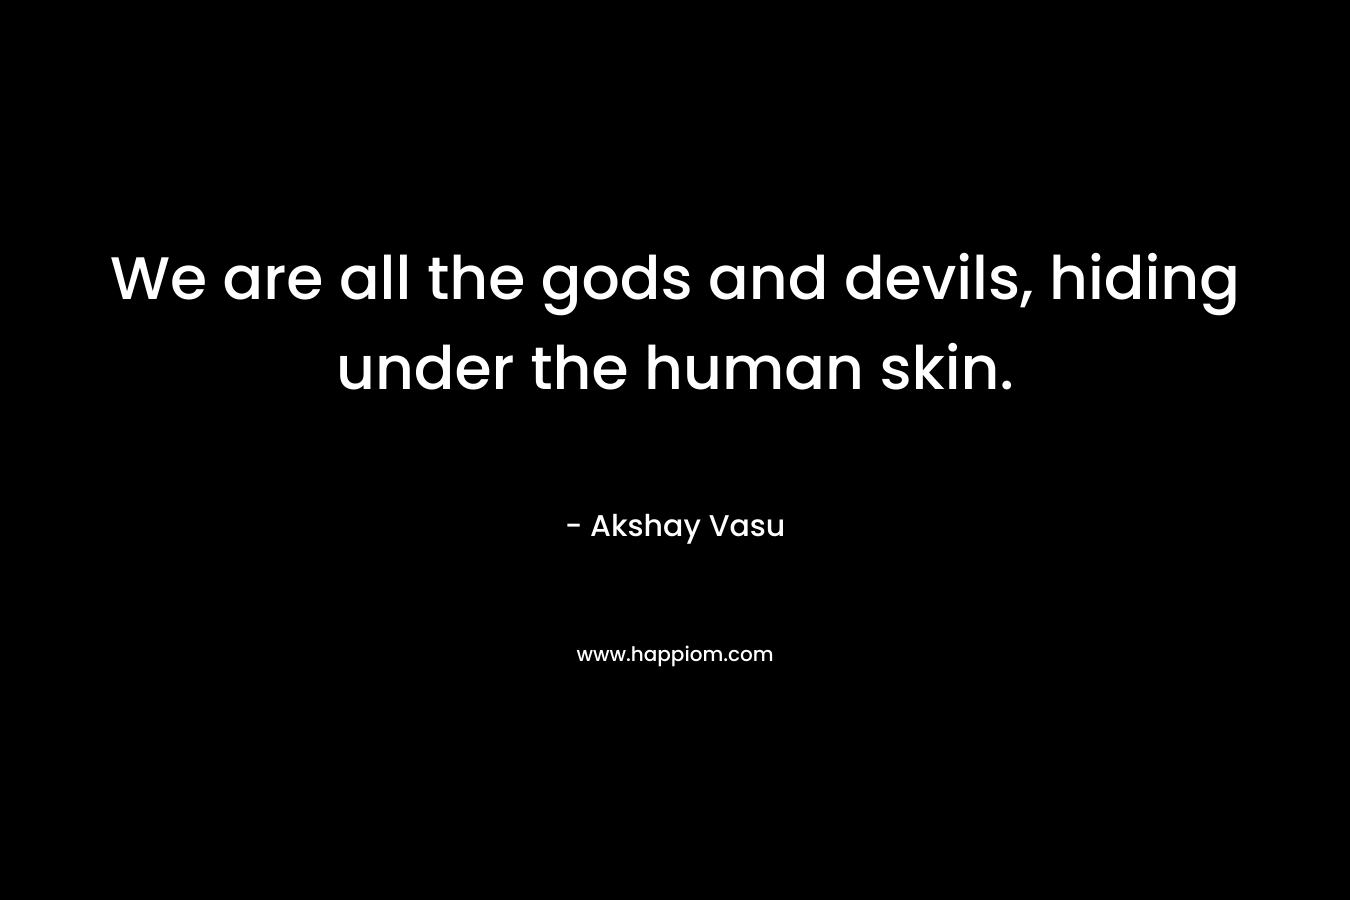 We are all the gods and devils, hiding under the human skin.